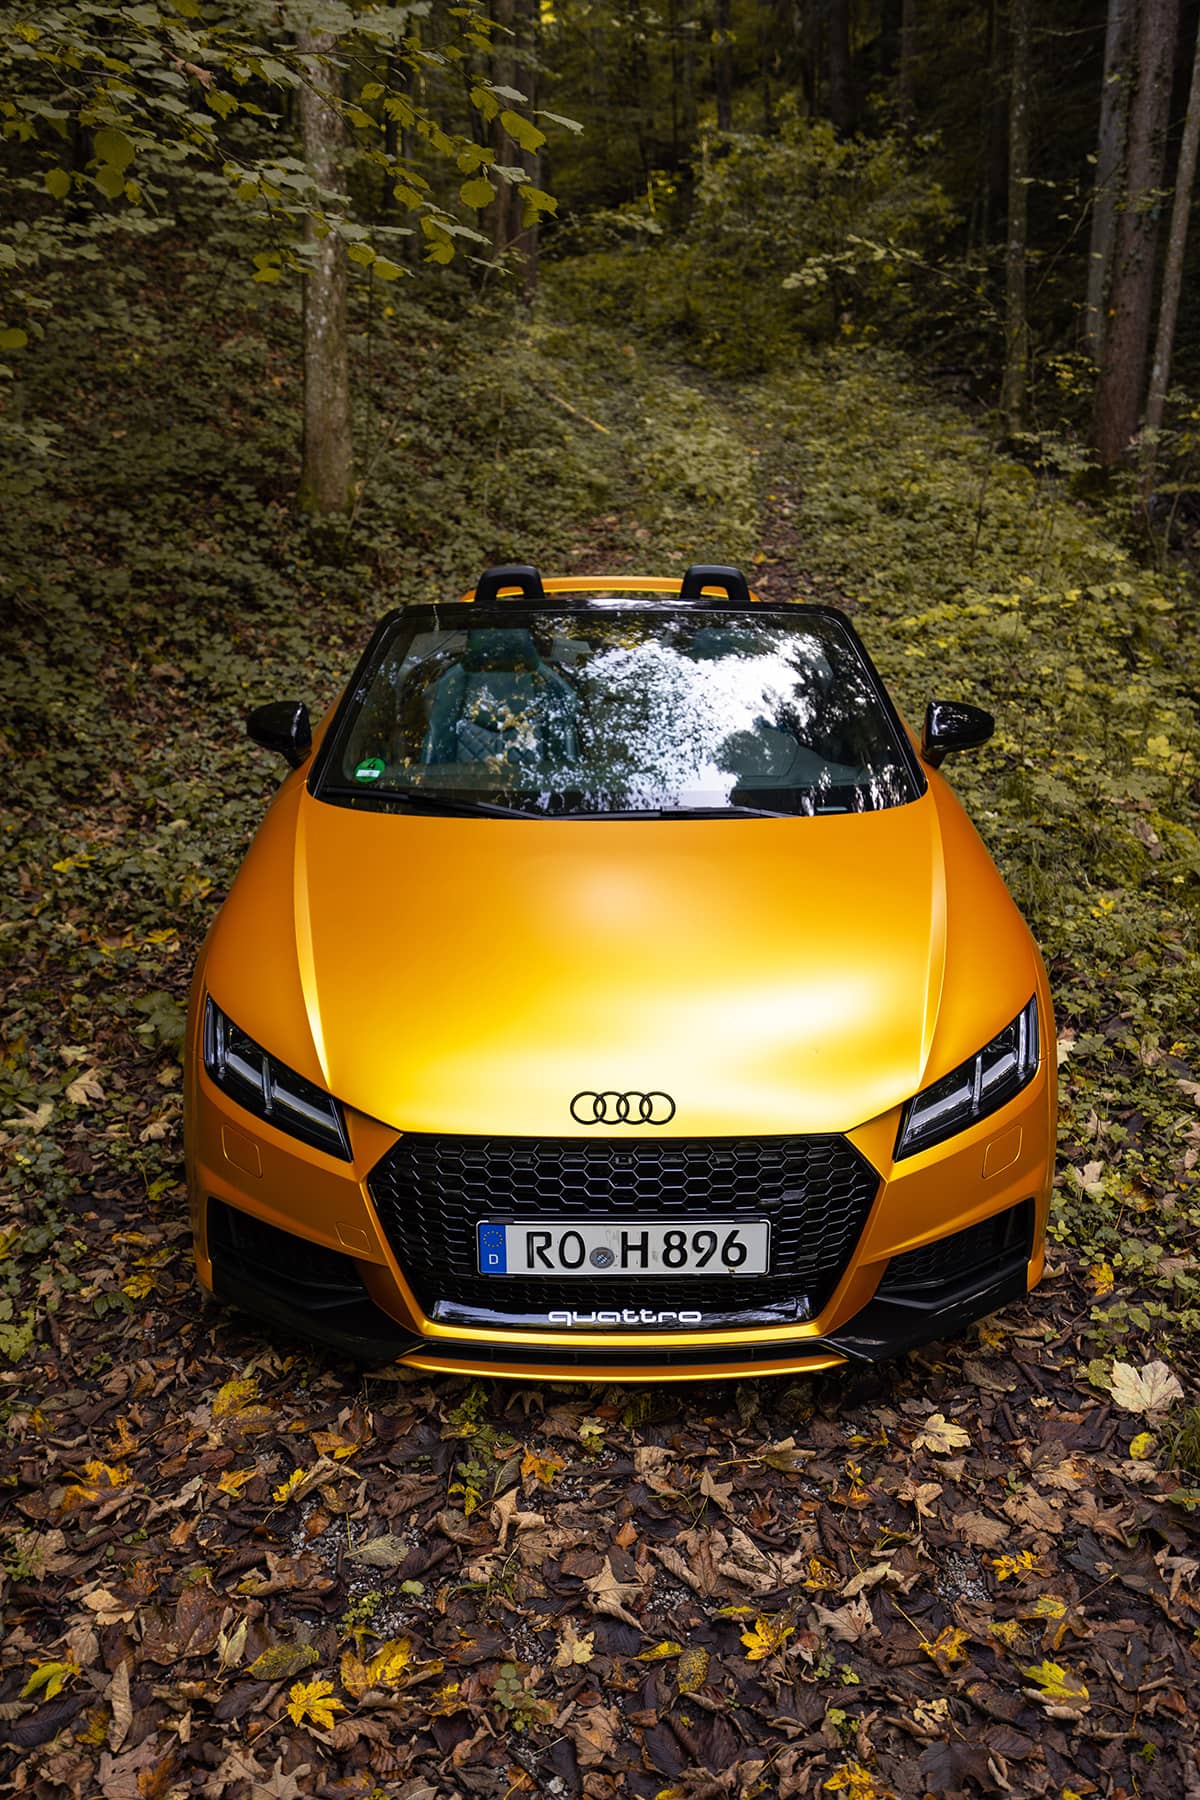 MK3 Audi TT roadster with black RS honeycomb grille in Yellow vynil wrap